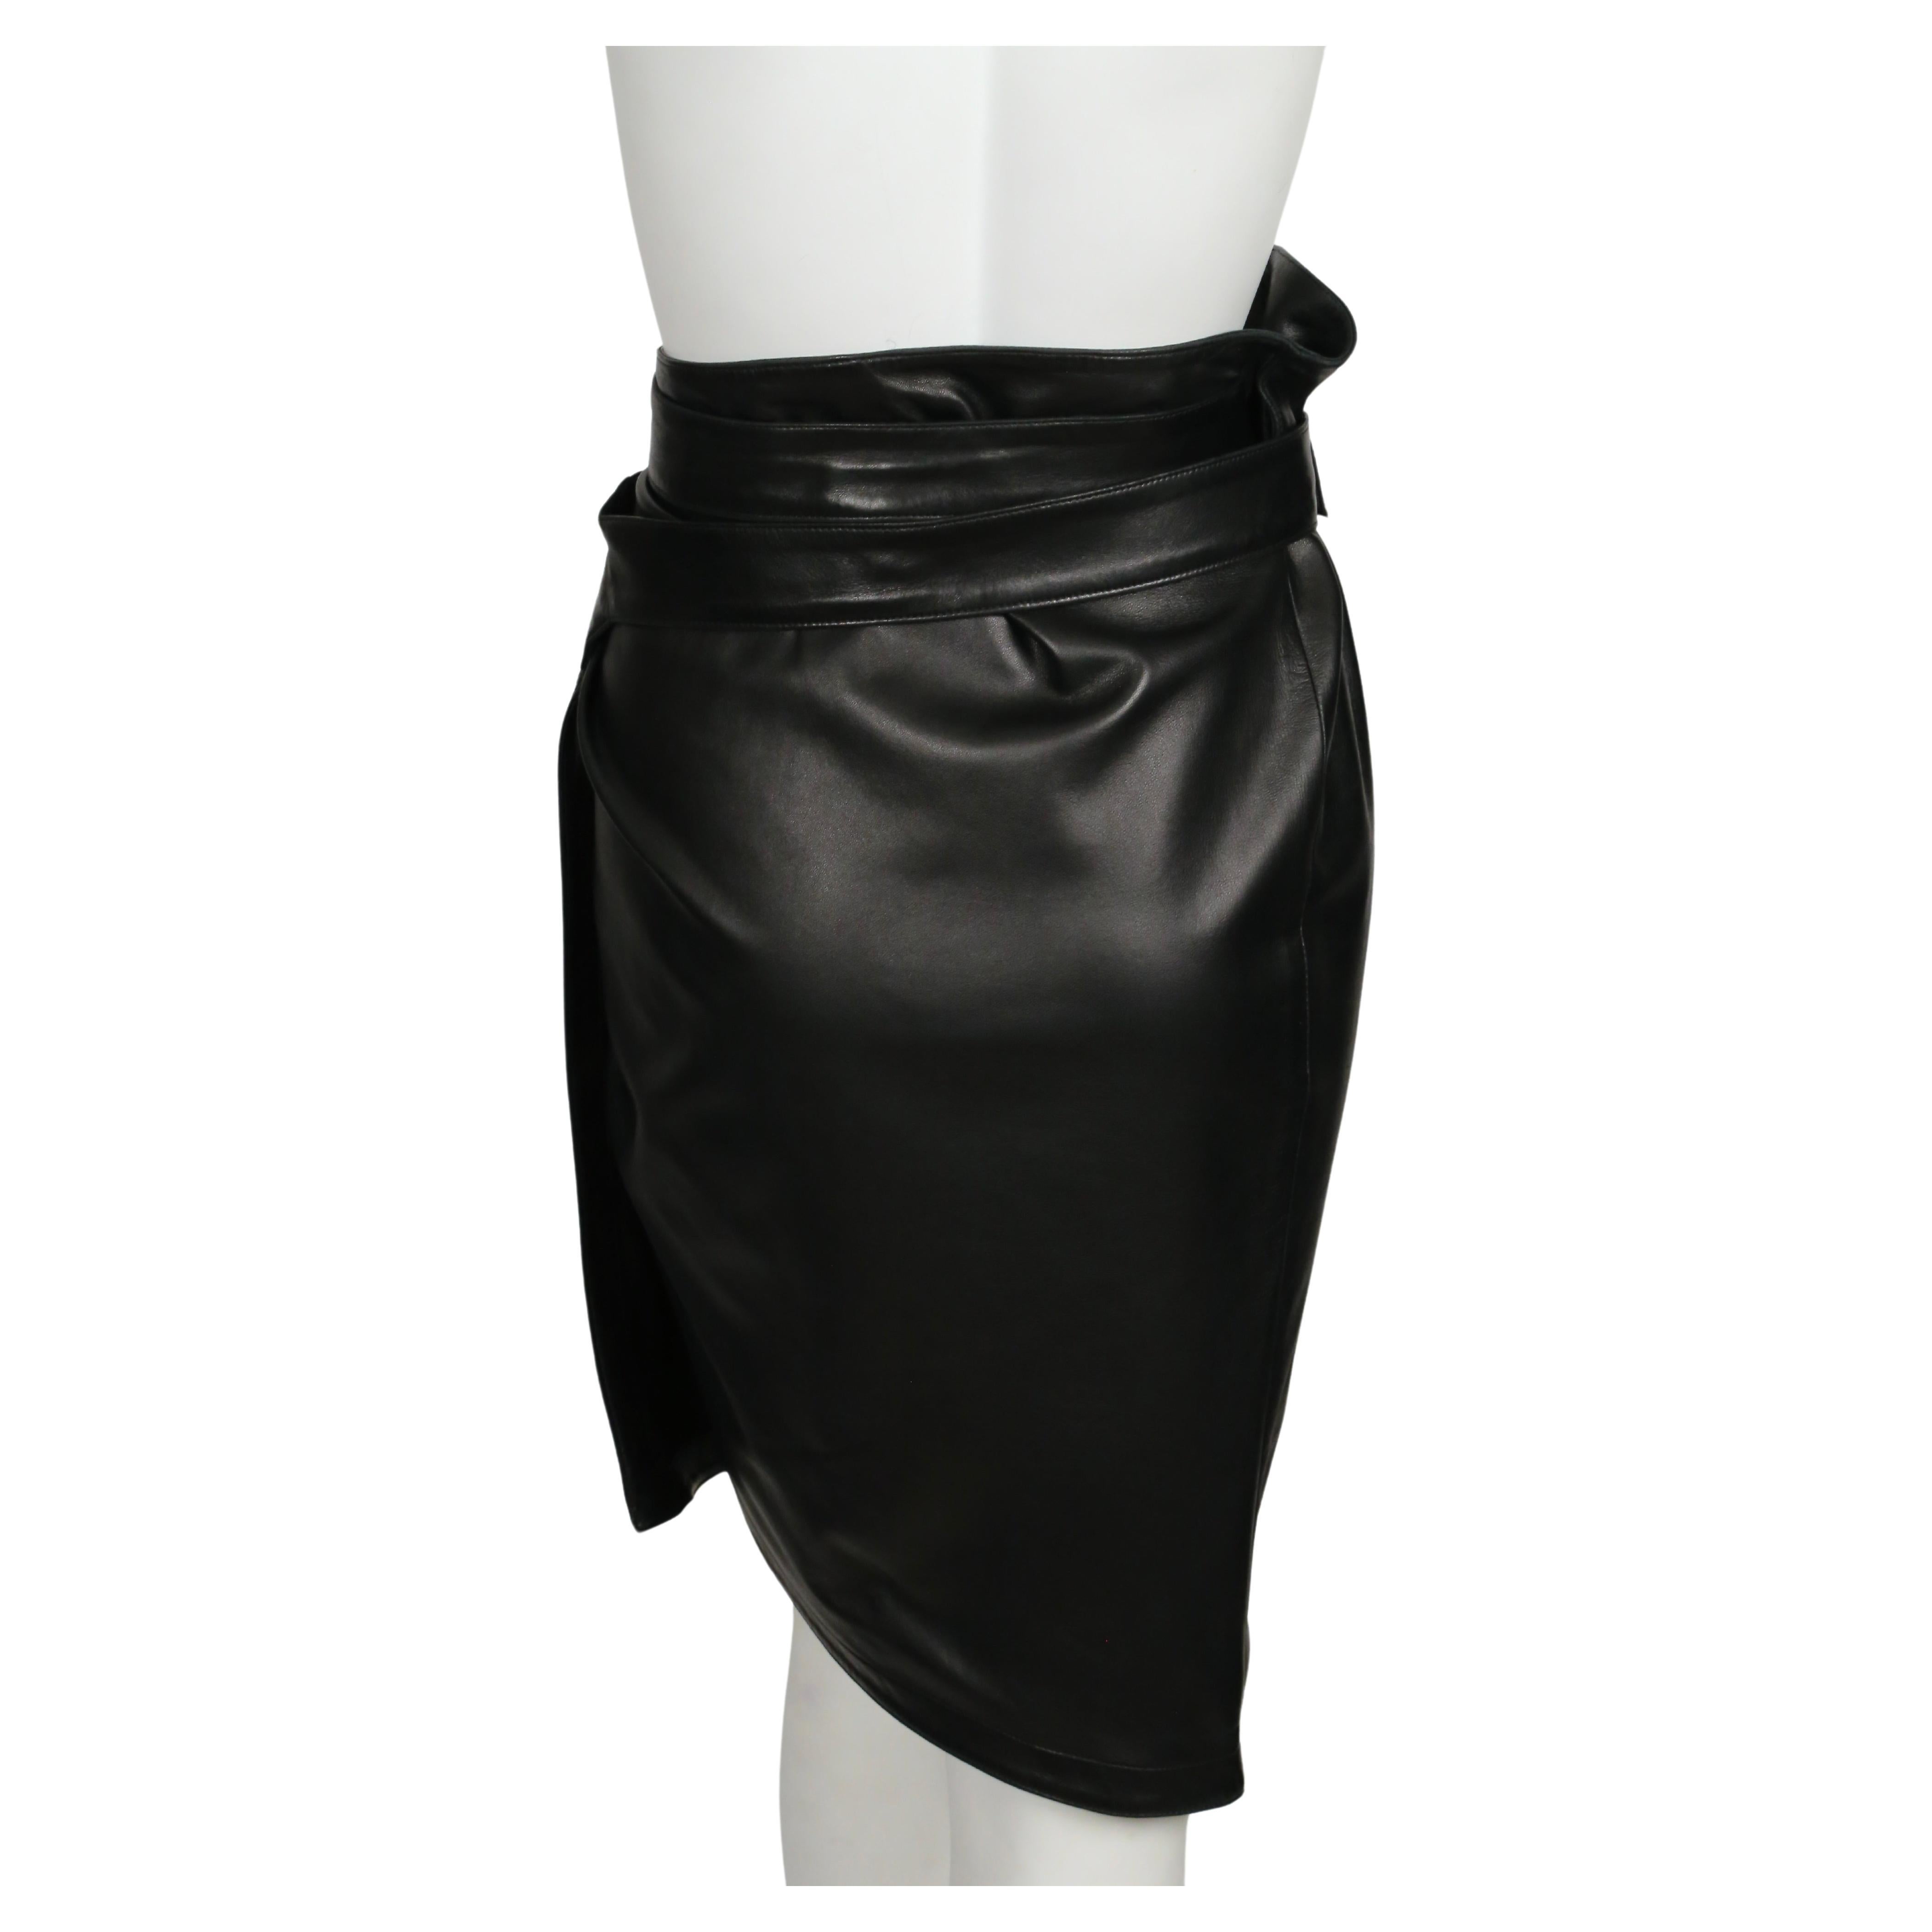 1984 AZZEDINE ALAIA black leather wrap skirt with side buckle For Sale 2